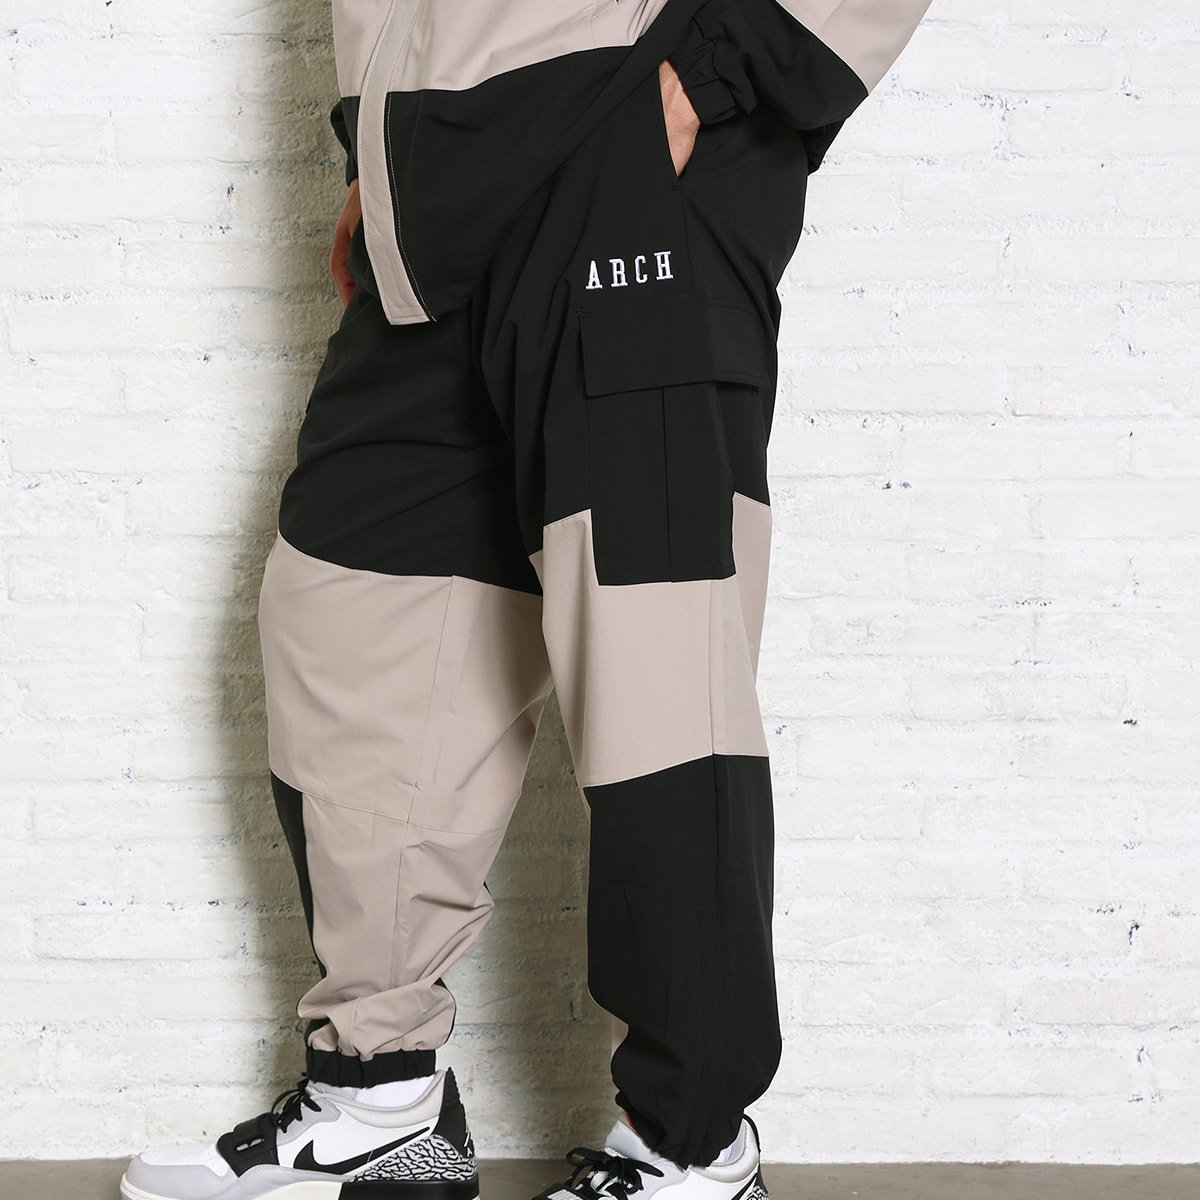 transition paneled cargo pants【sand beige】 - Arch ☆ アーチ 